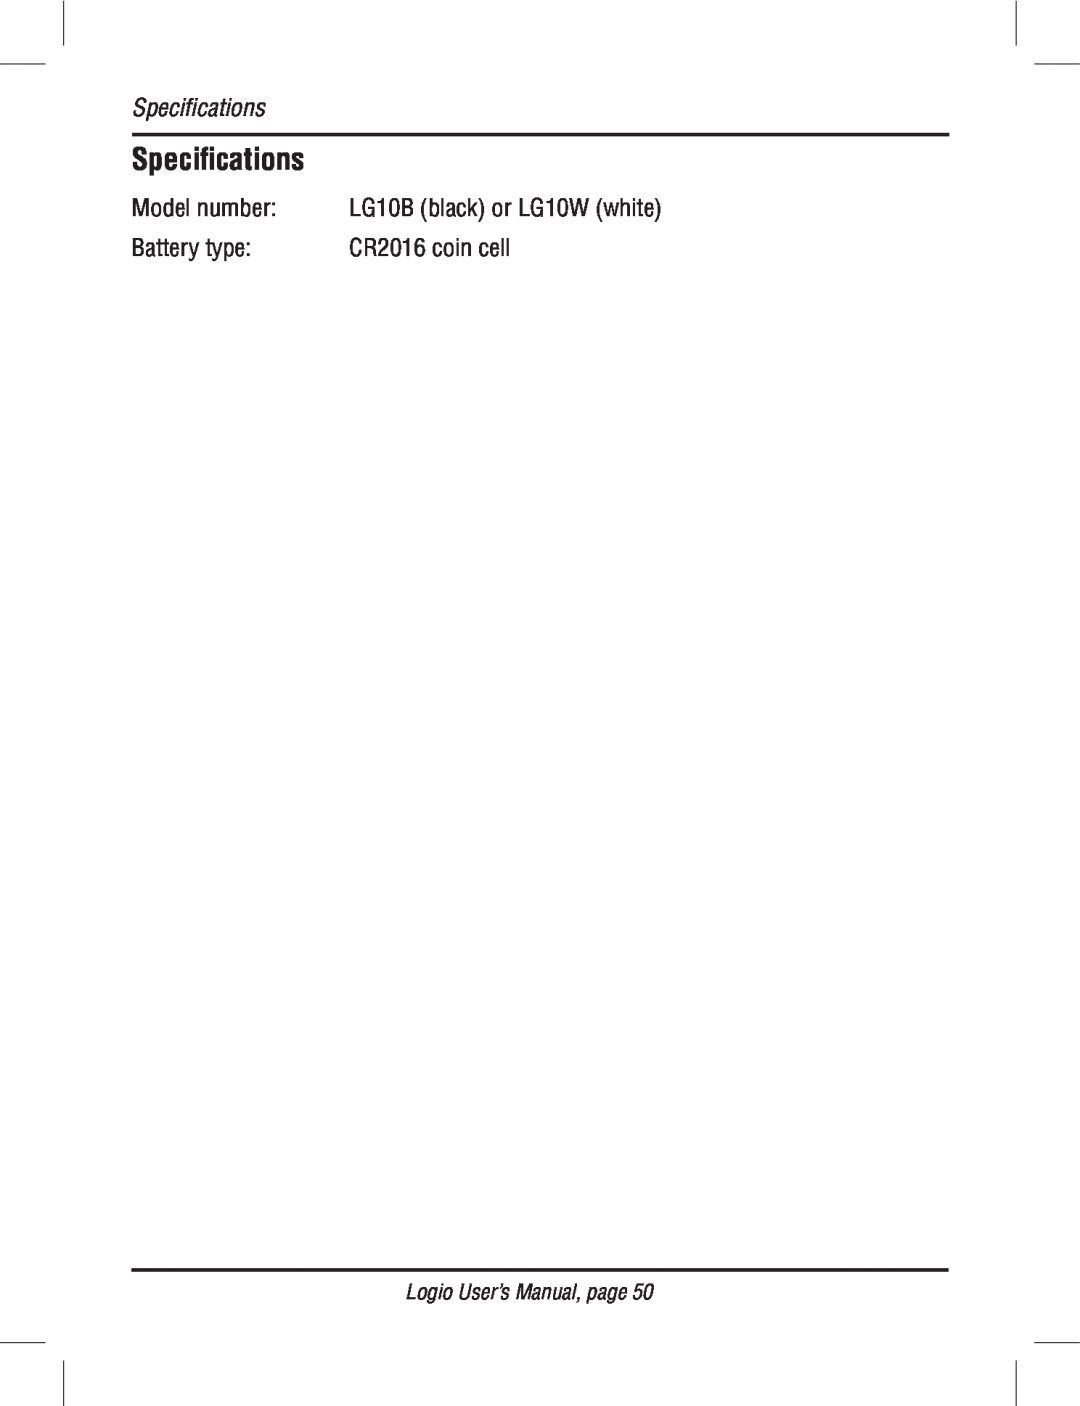 Atek electronic LG10B, LG10W user manual Specifications, Logio User’s Manual, page 